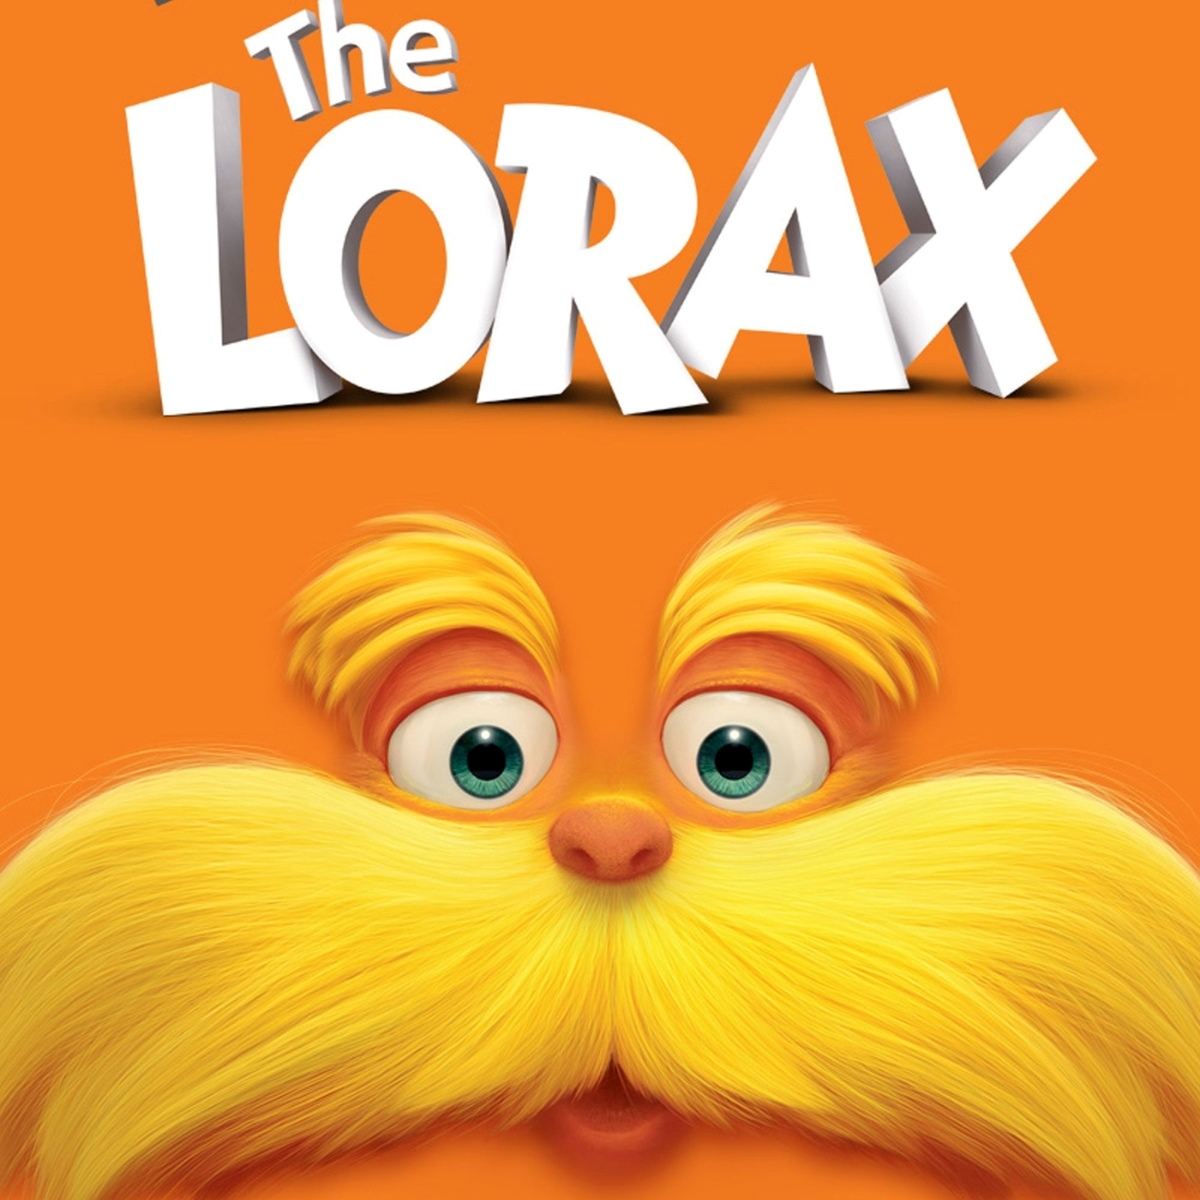 13-facts-about-the-lorax-dr-seuss-the-lorax